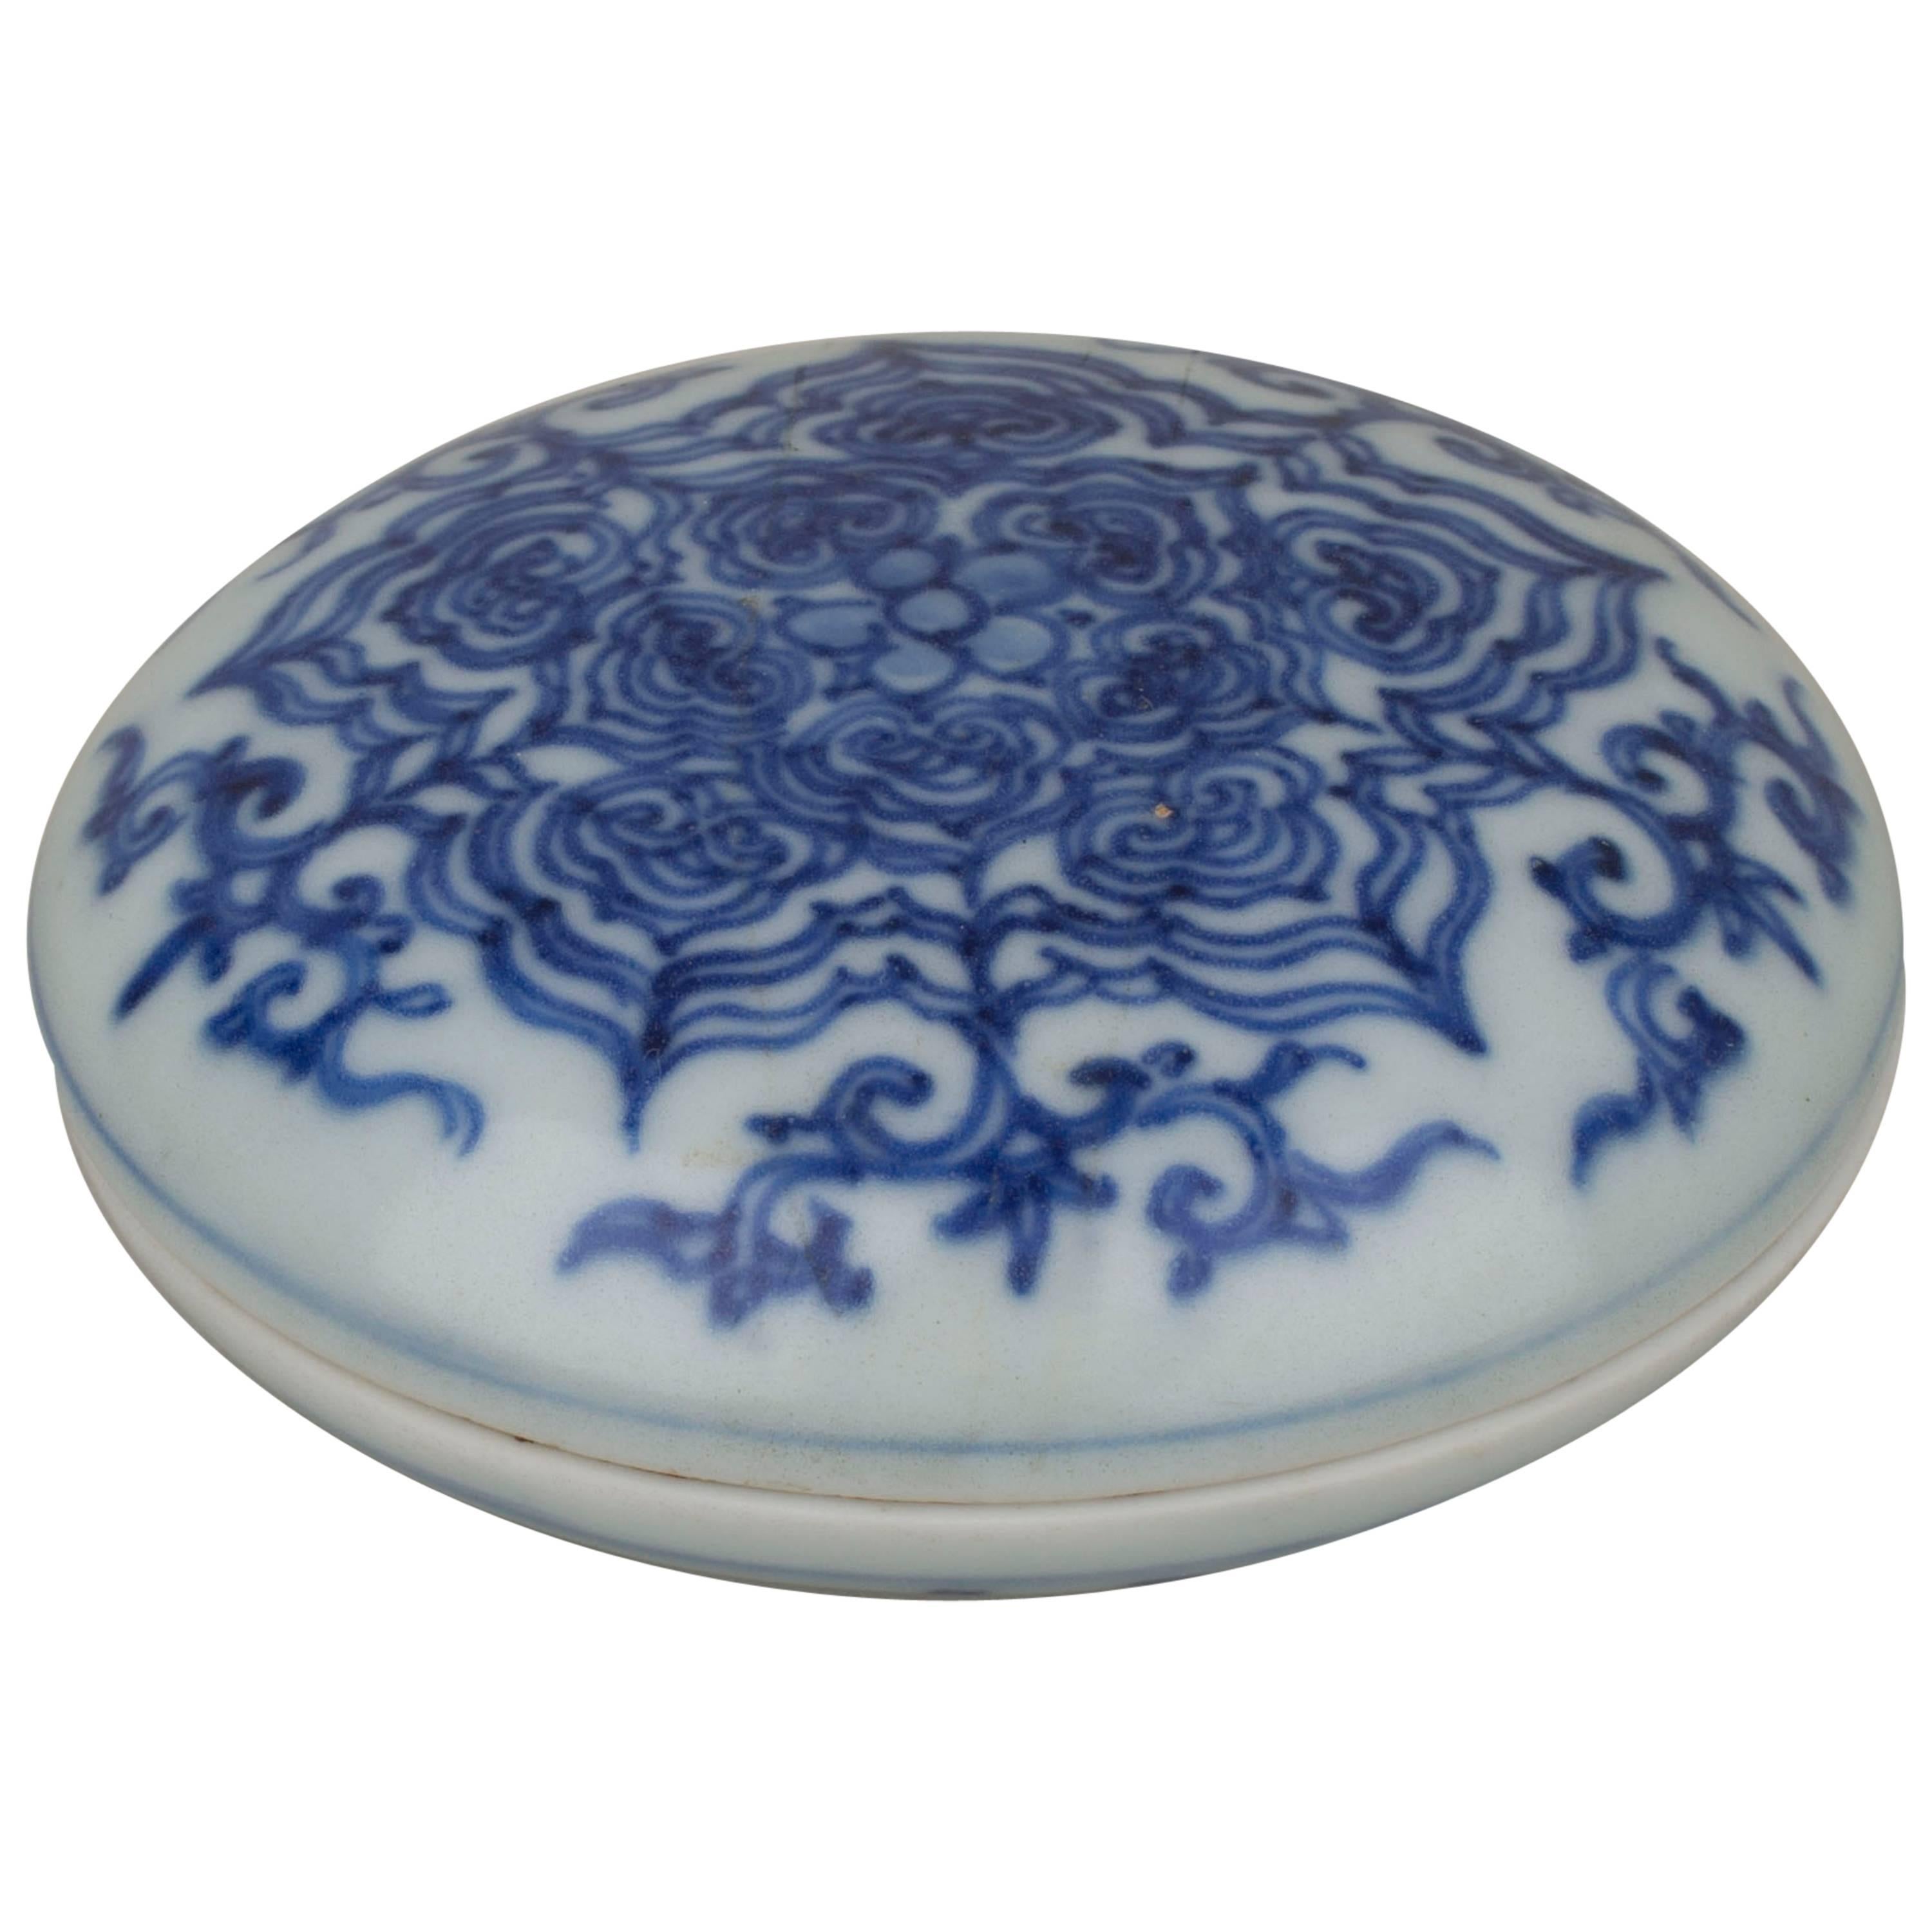 Chinese Export Porcelain Blue and White Soft Paste Box, 17th Century For Sale